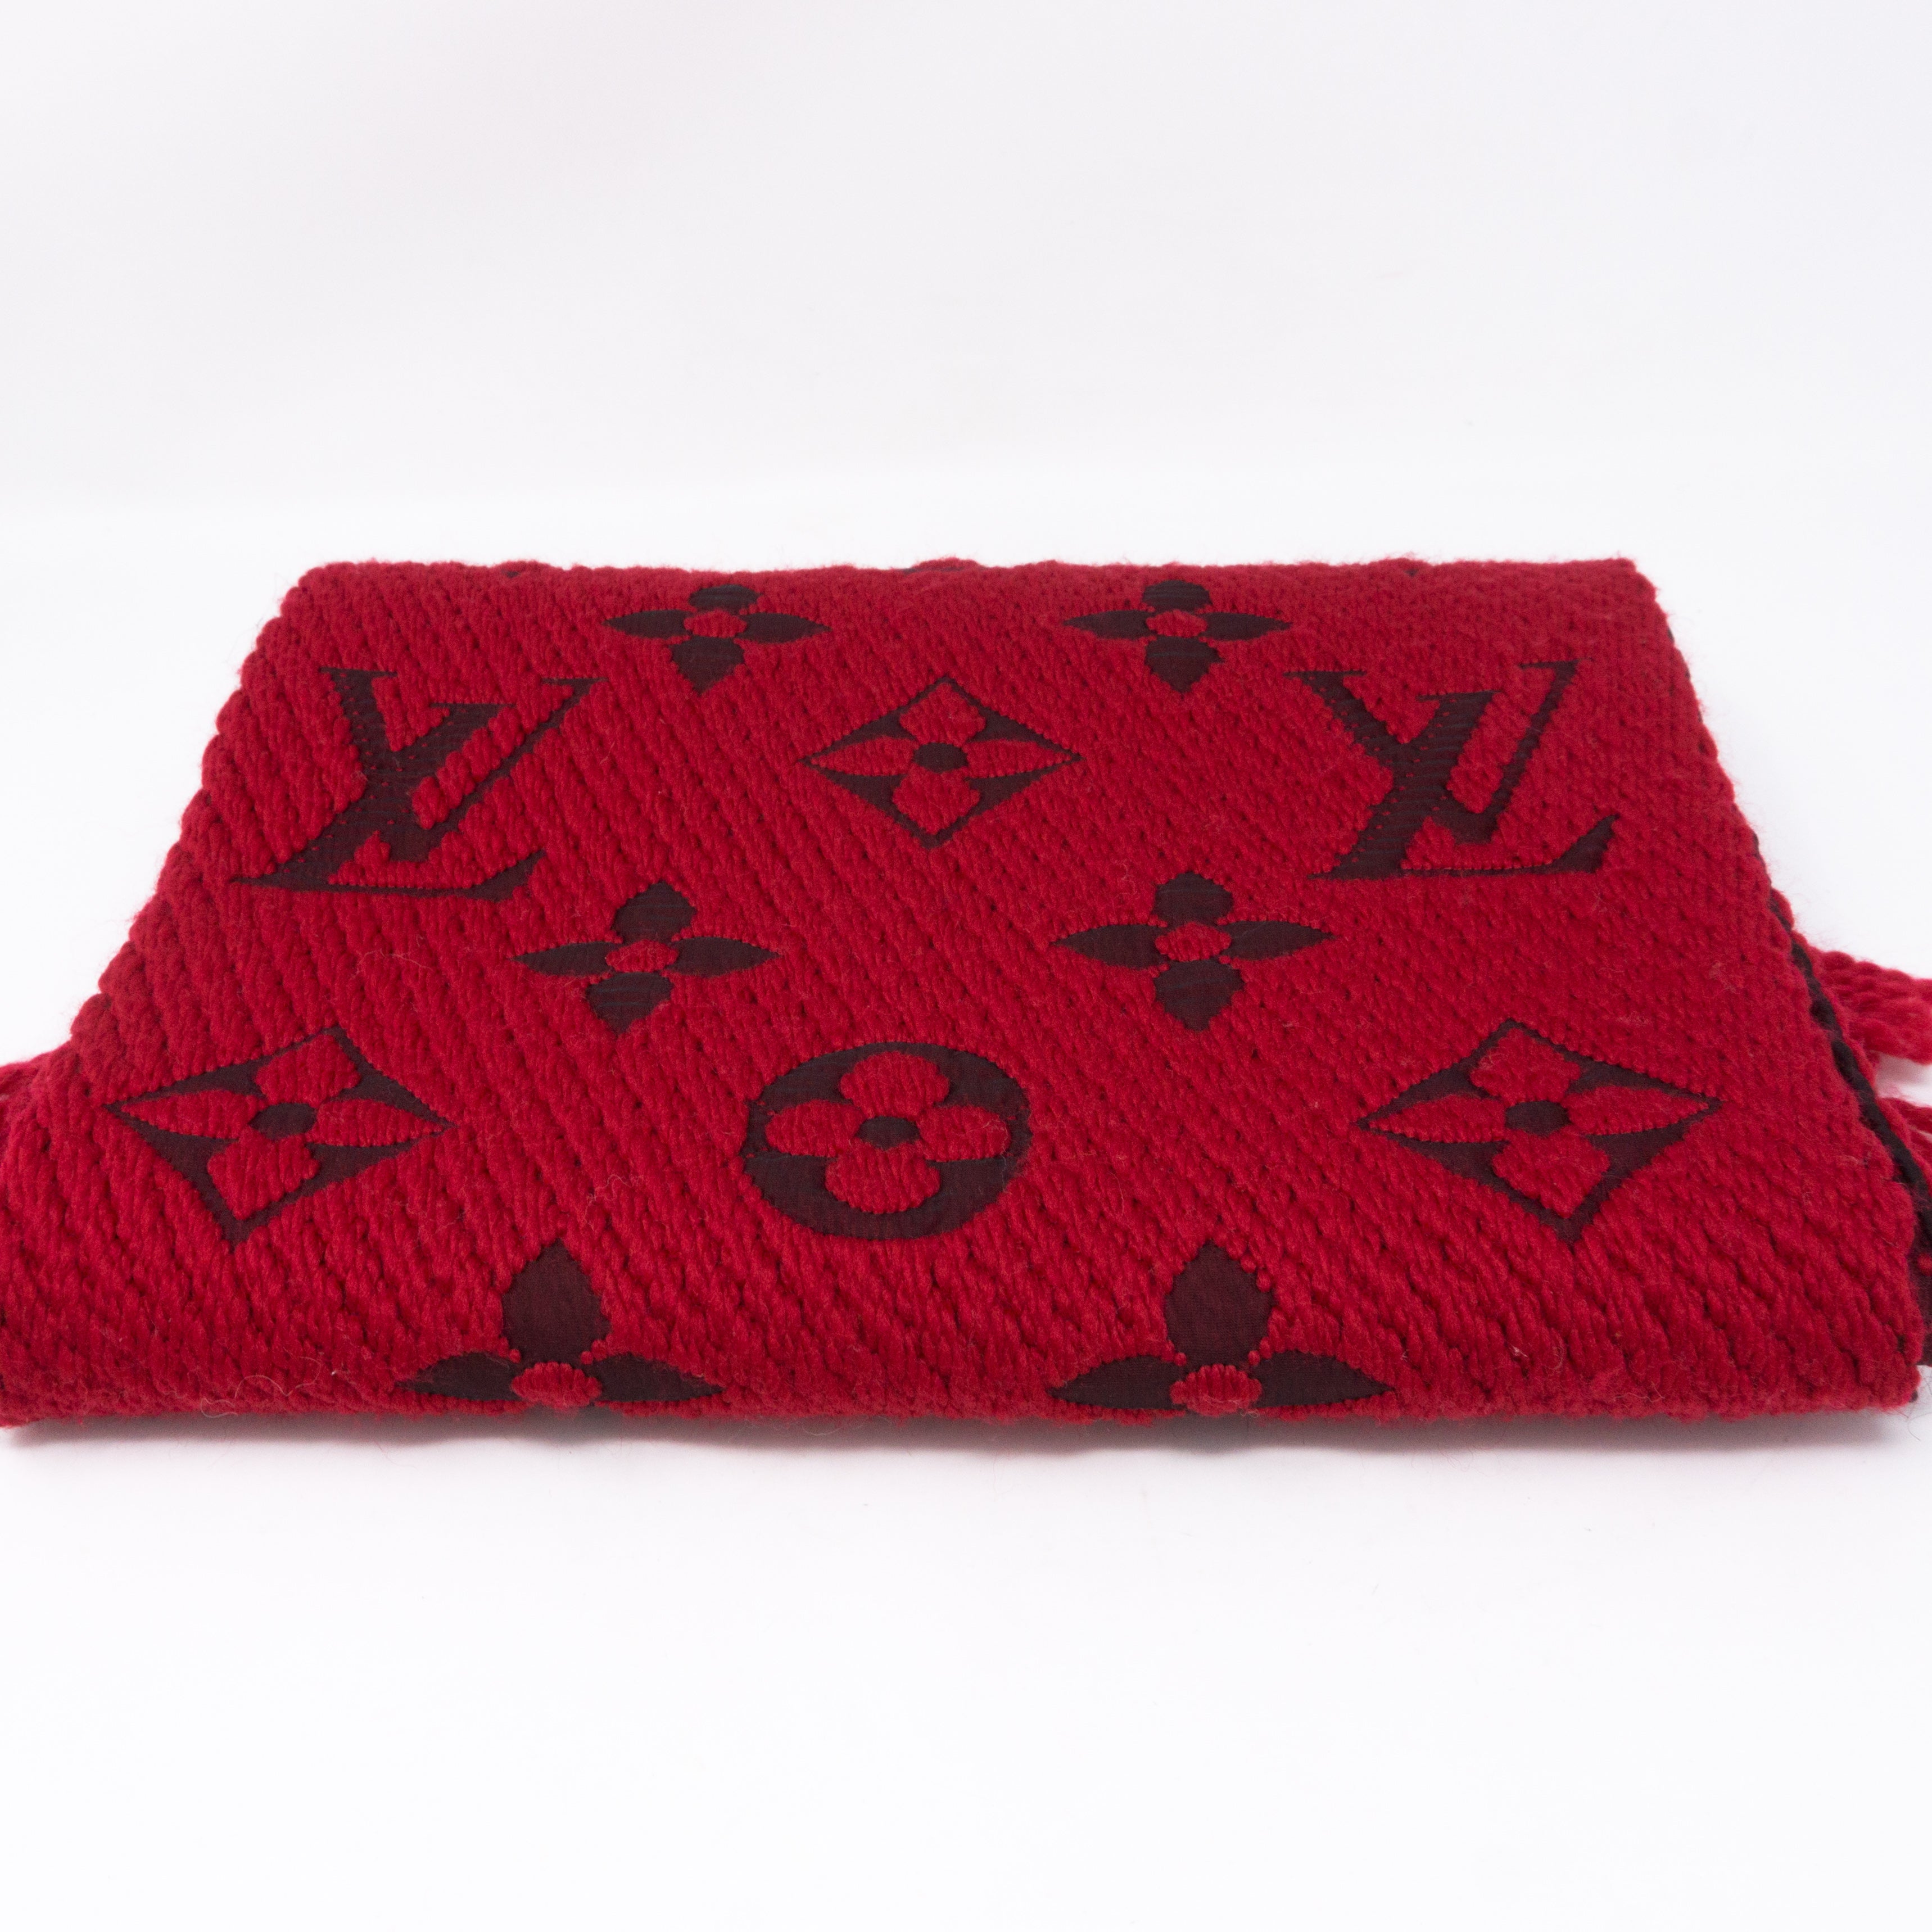 Products By Louis Vuitton: Logomania Vuittonite Scarf